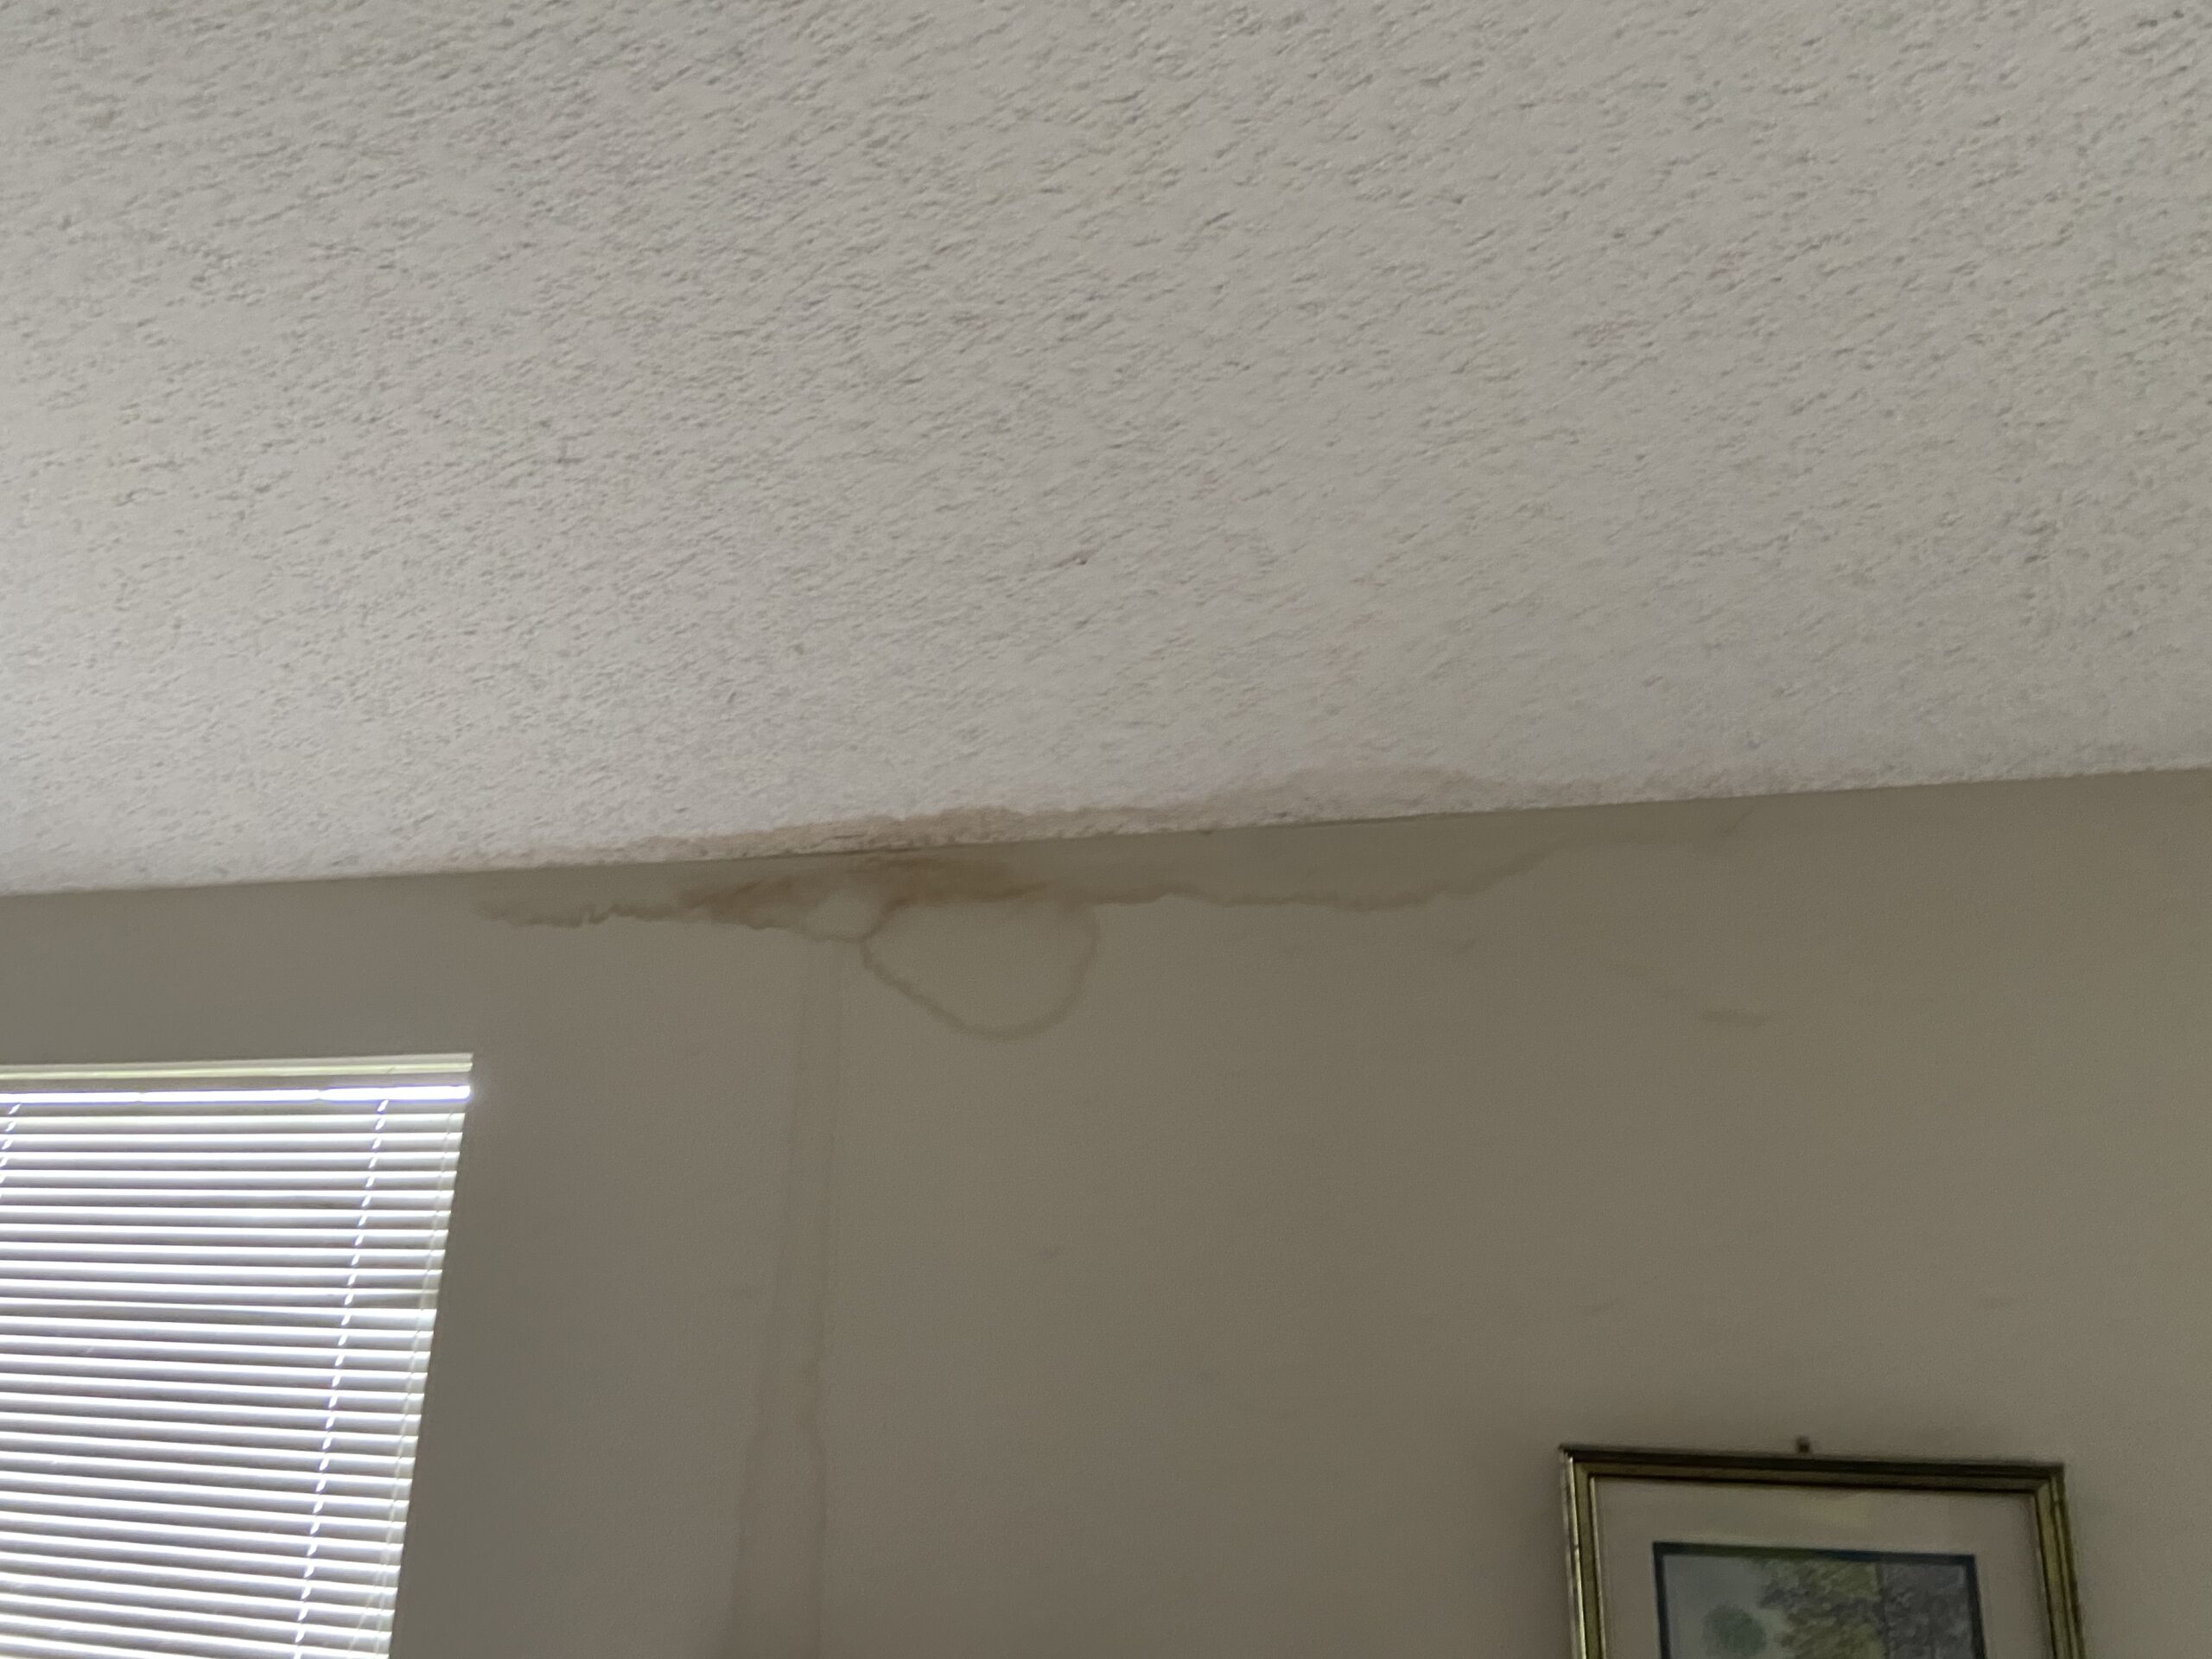 here is another roof leak that is causing ceiling stains